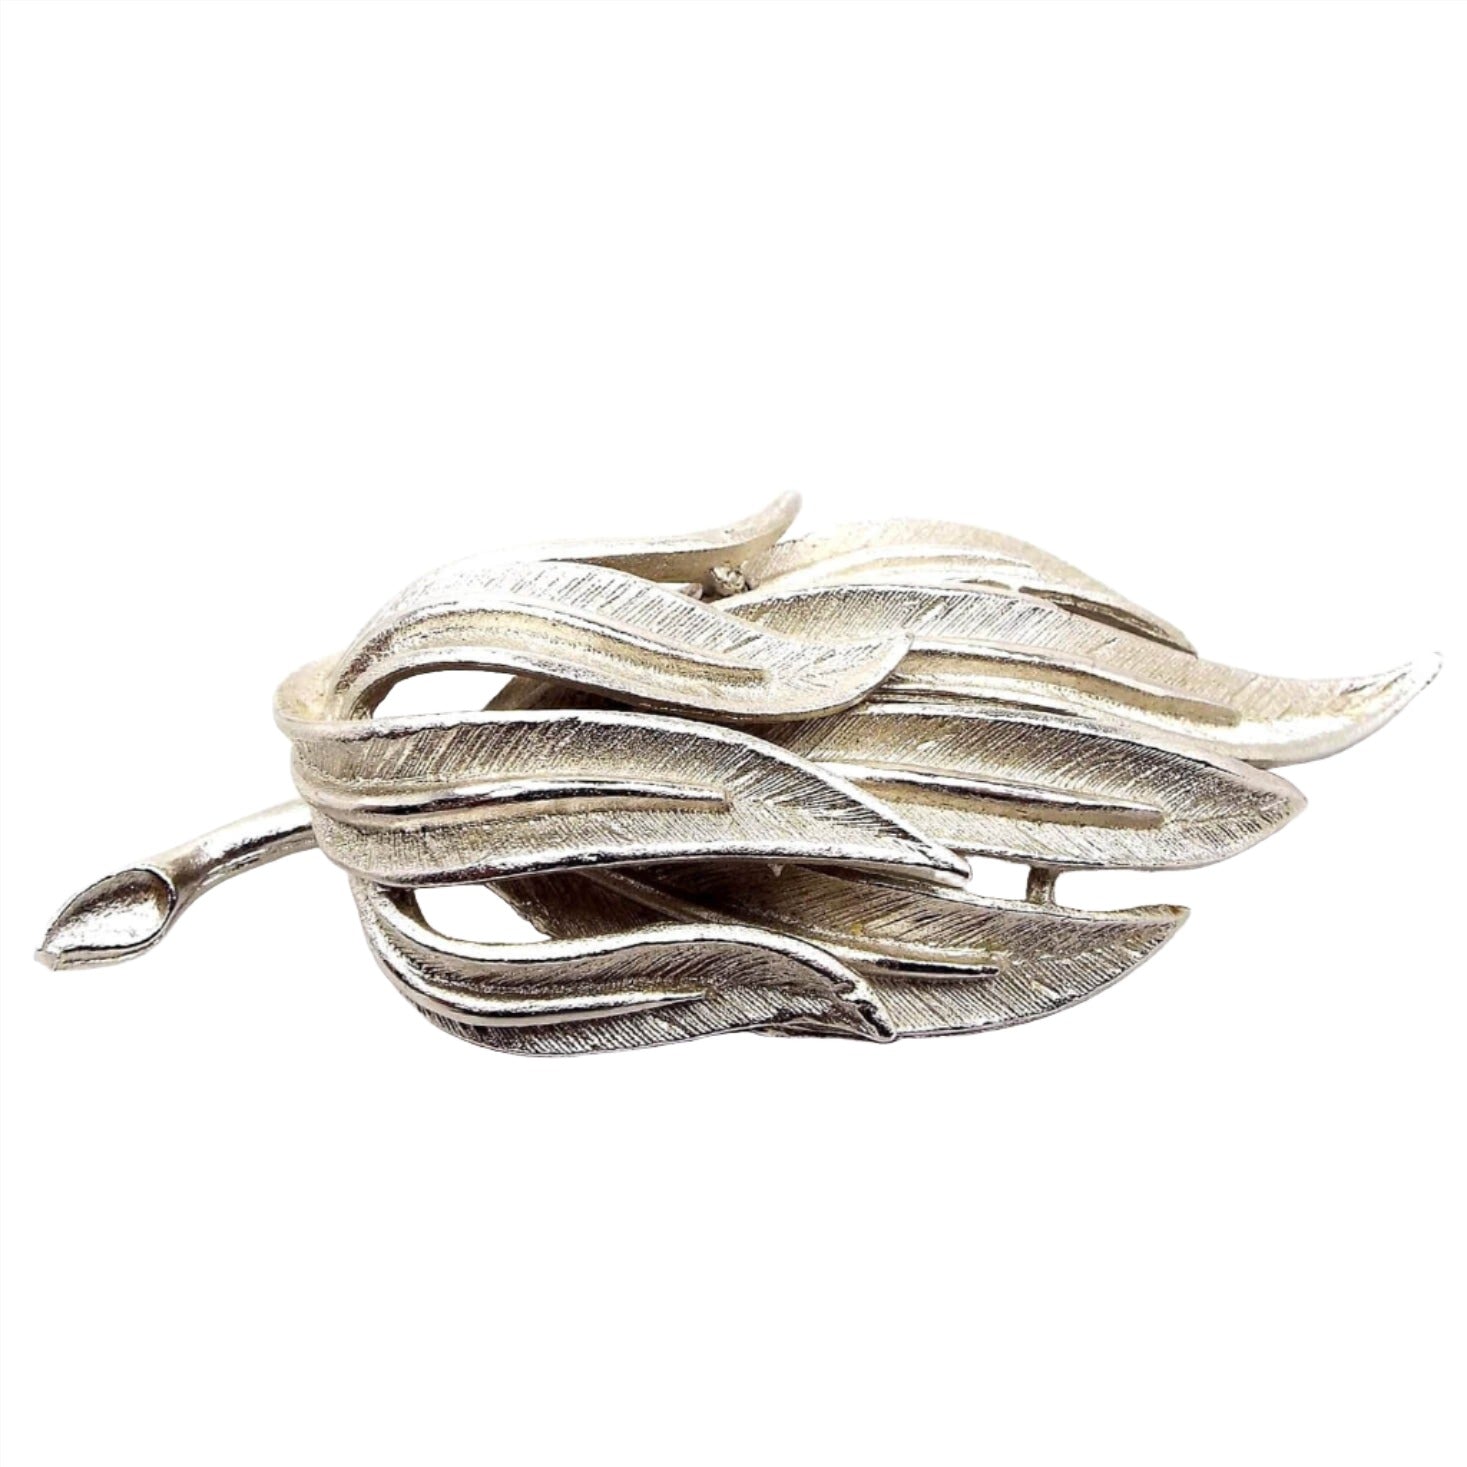 Front view of the Coro Mid Century vintage branch brooch pin. It is silver tone in color with a matte textured design of long leaves on the end.